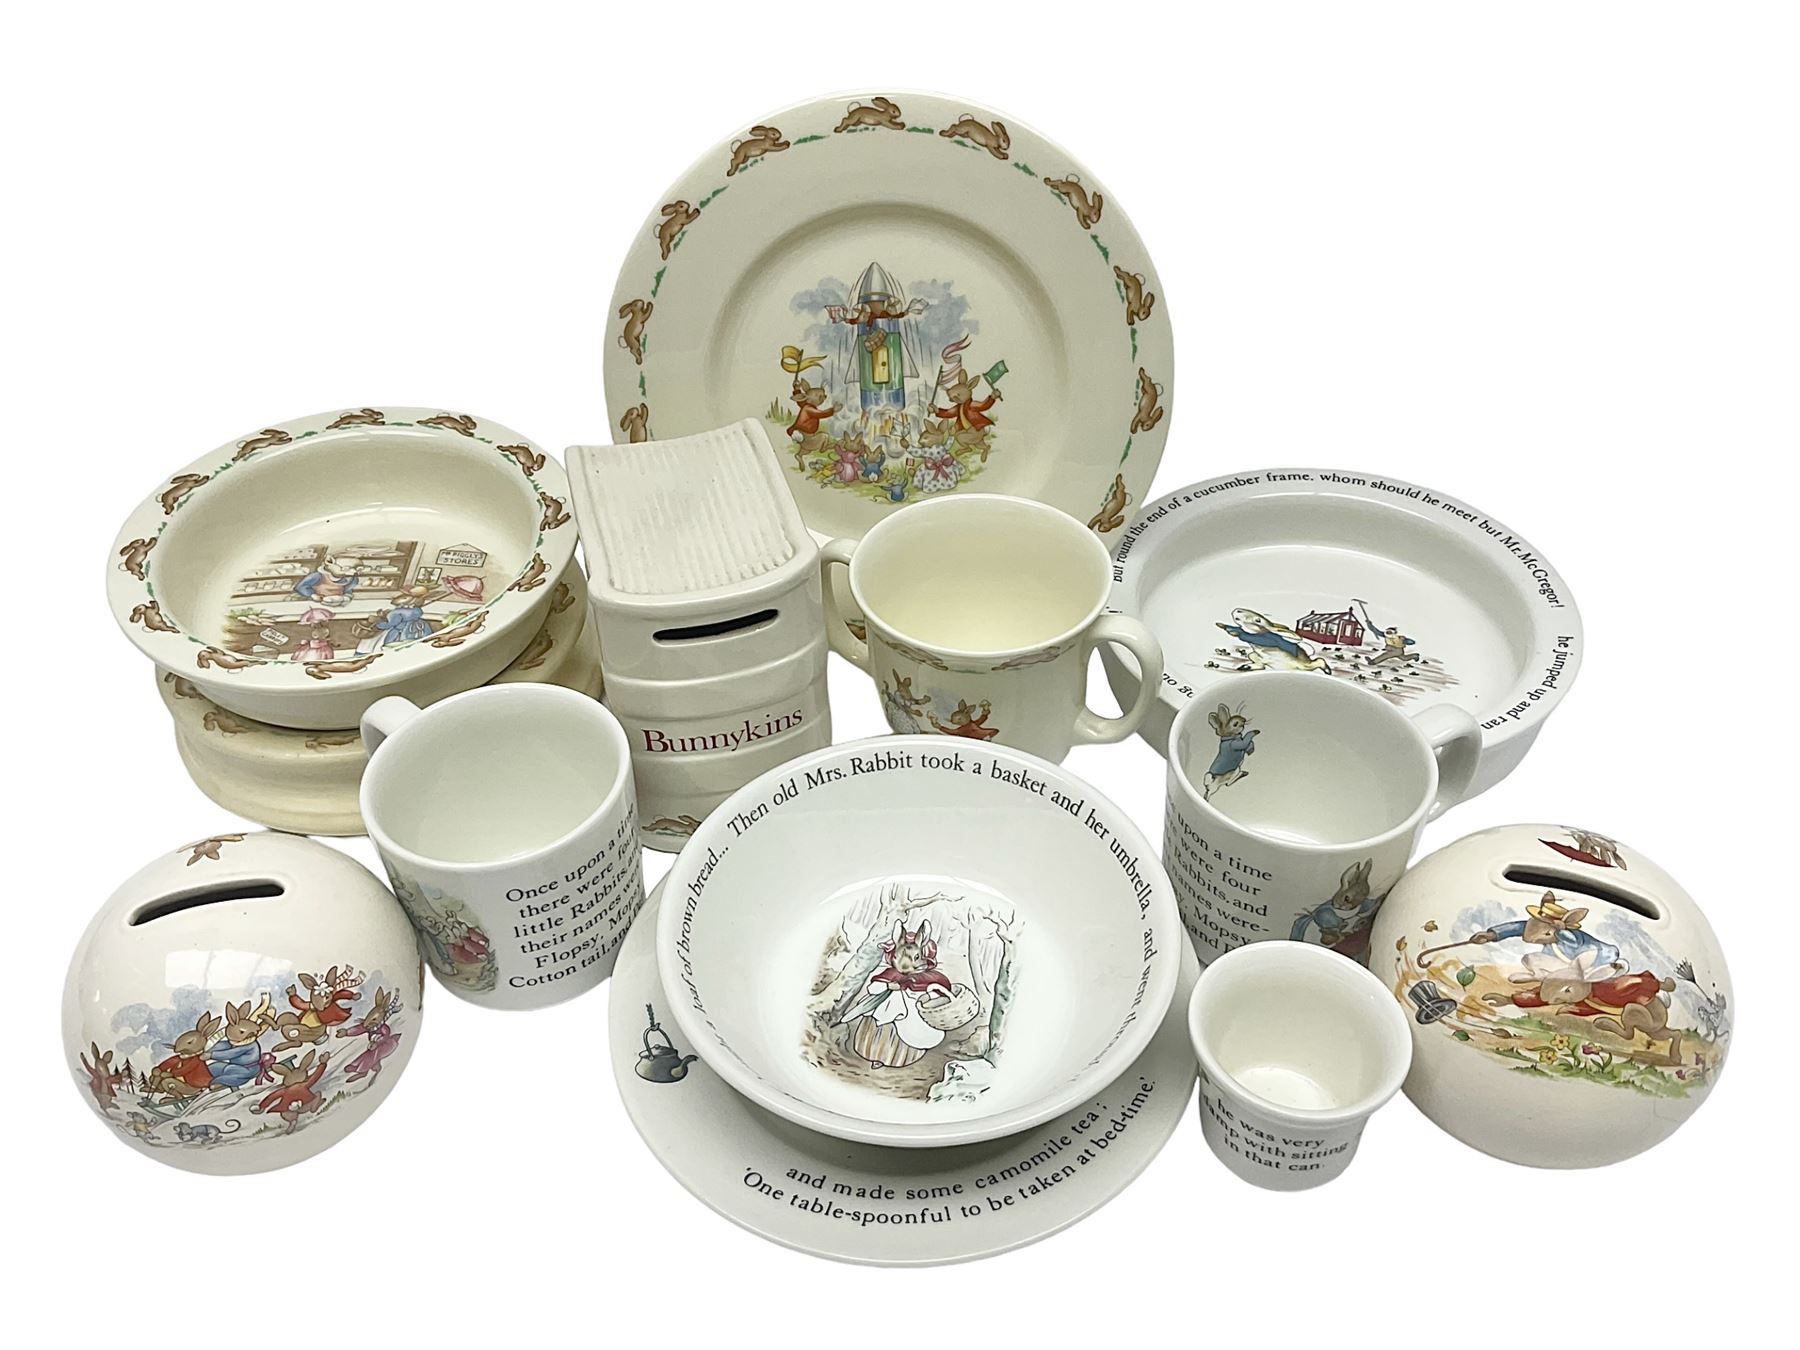 Collection of Royal Doulton Bunnykins and Wedgwood Peter Rabbit nursery ware